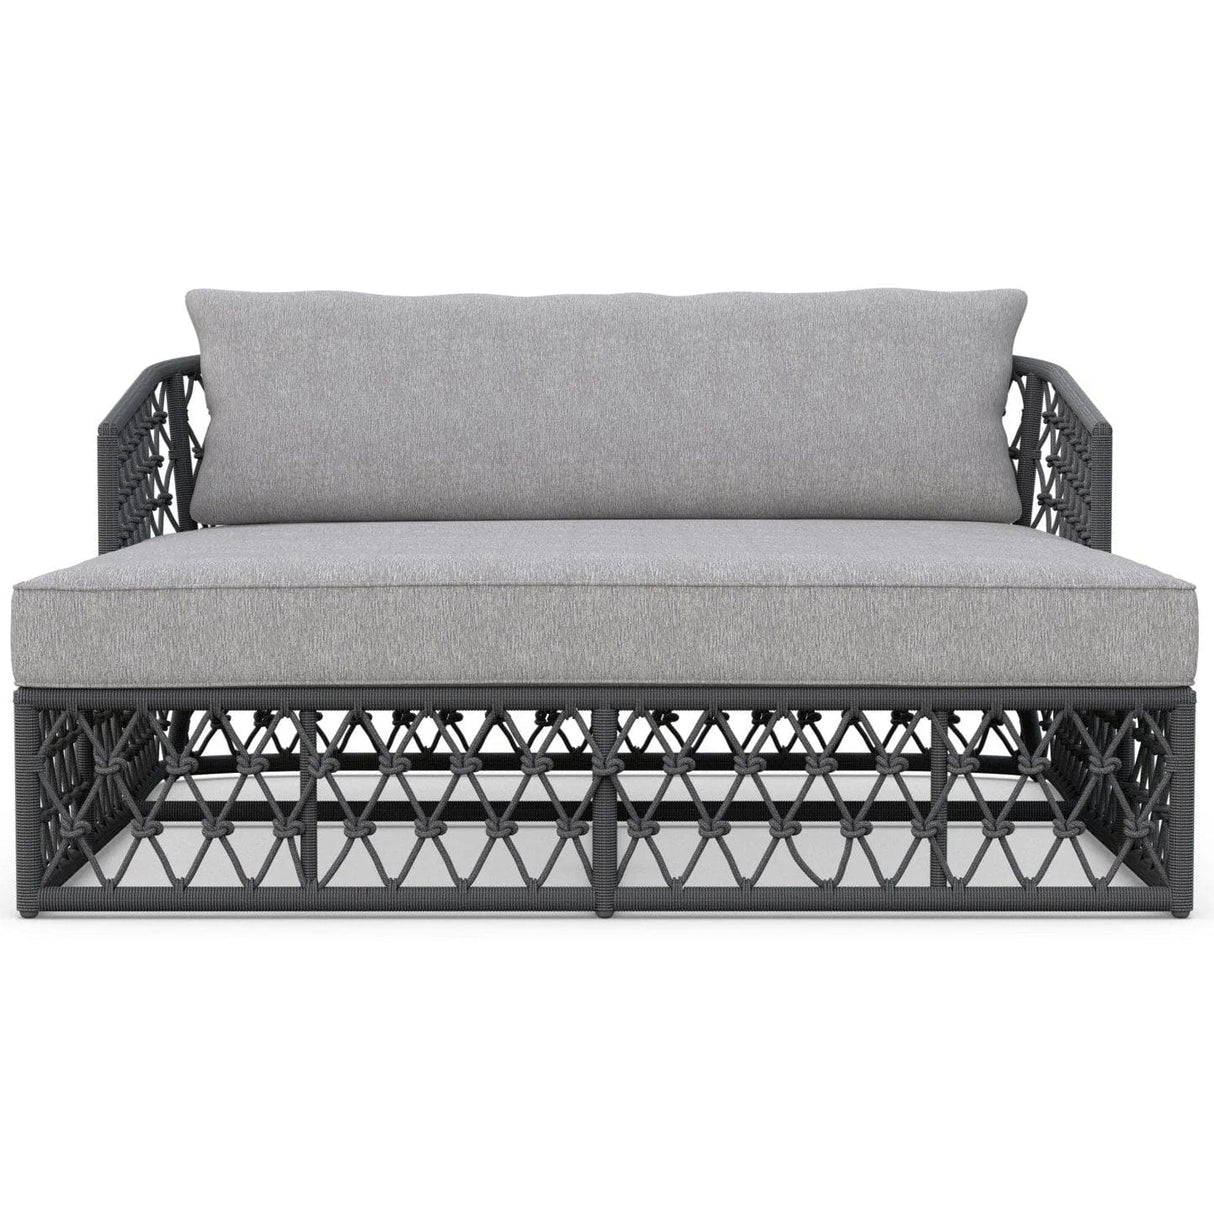 Azzurro Living Amelia Daybed Outdoor Furniture